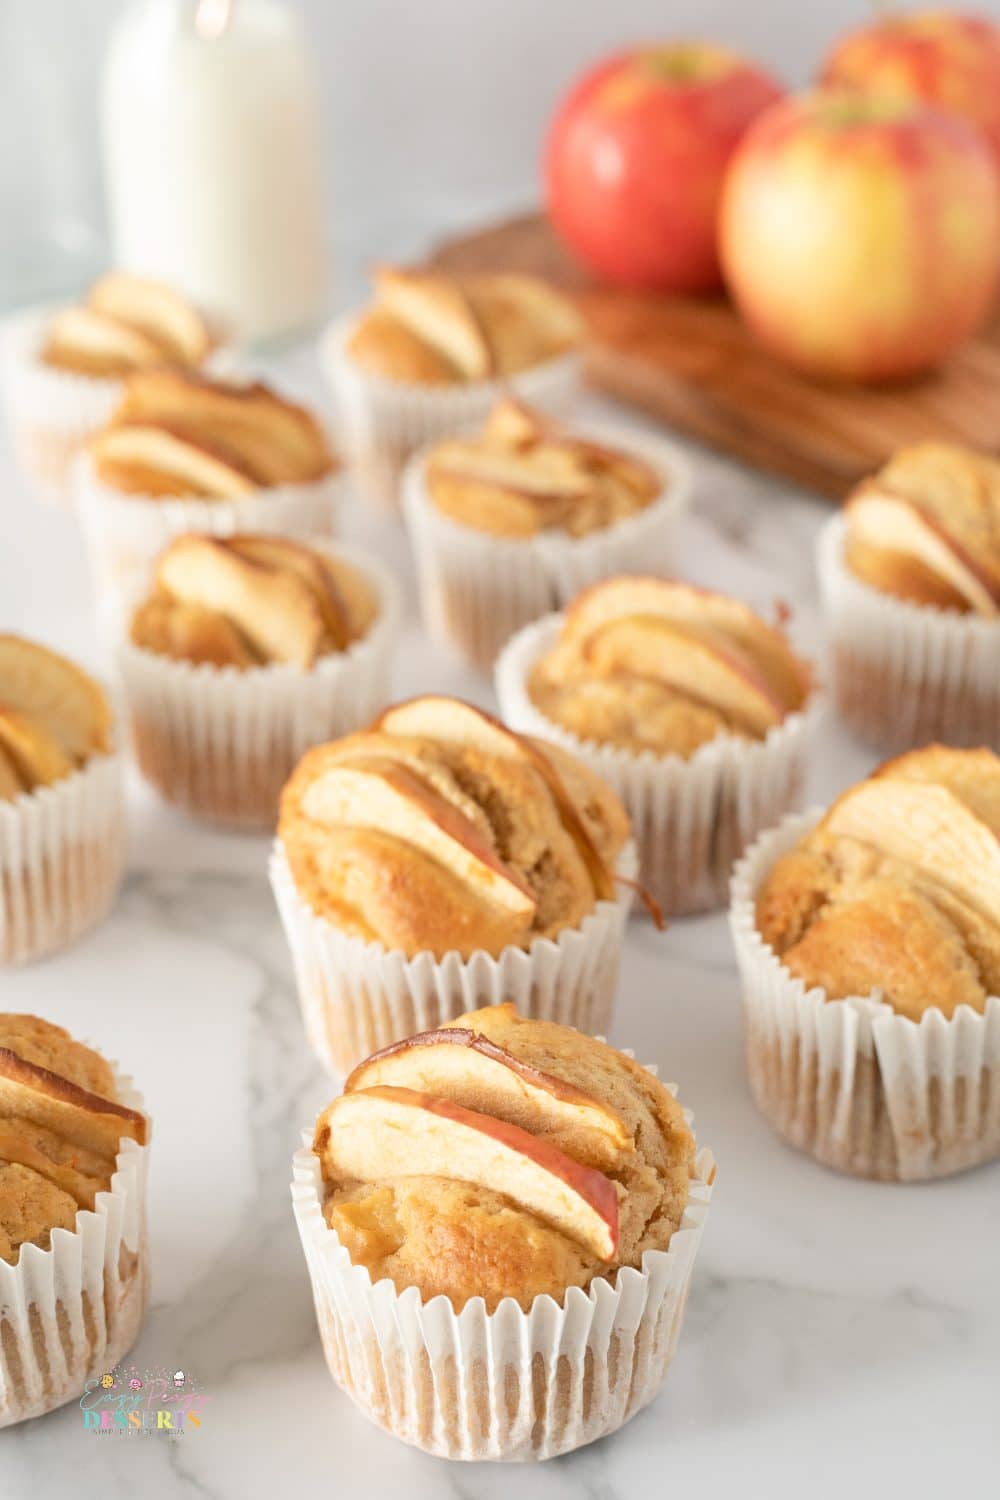 Angle image of apple and cinnamon muffins in cupcake liners